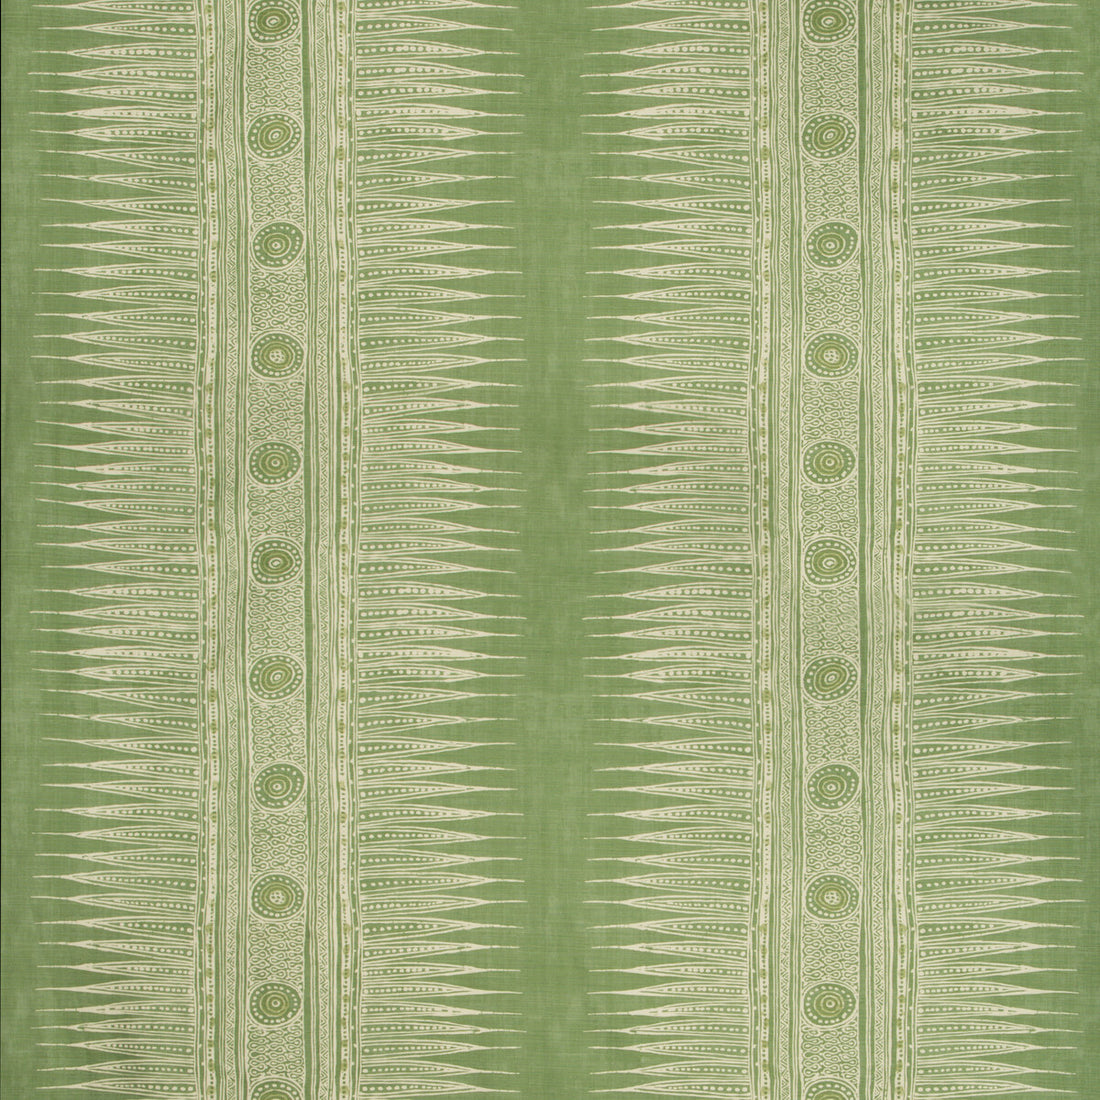 Indian Zag fabric in leaf color - pattern 2010136.303.0 - by Lee Jofa in the Suzanne Rheinstein III collection